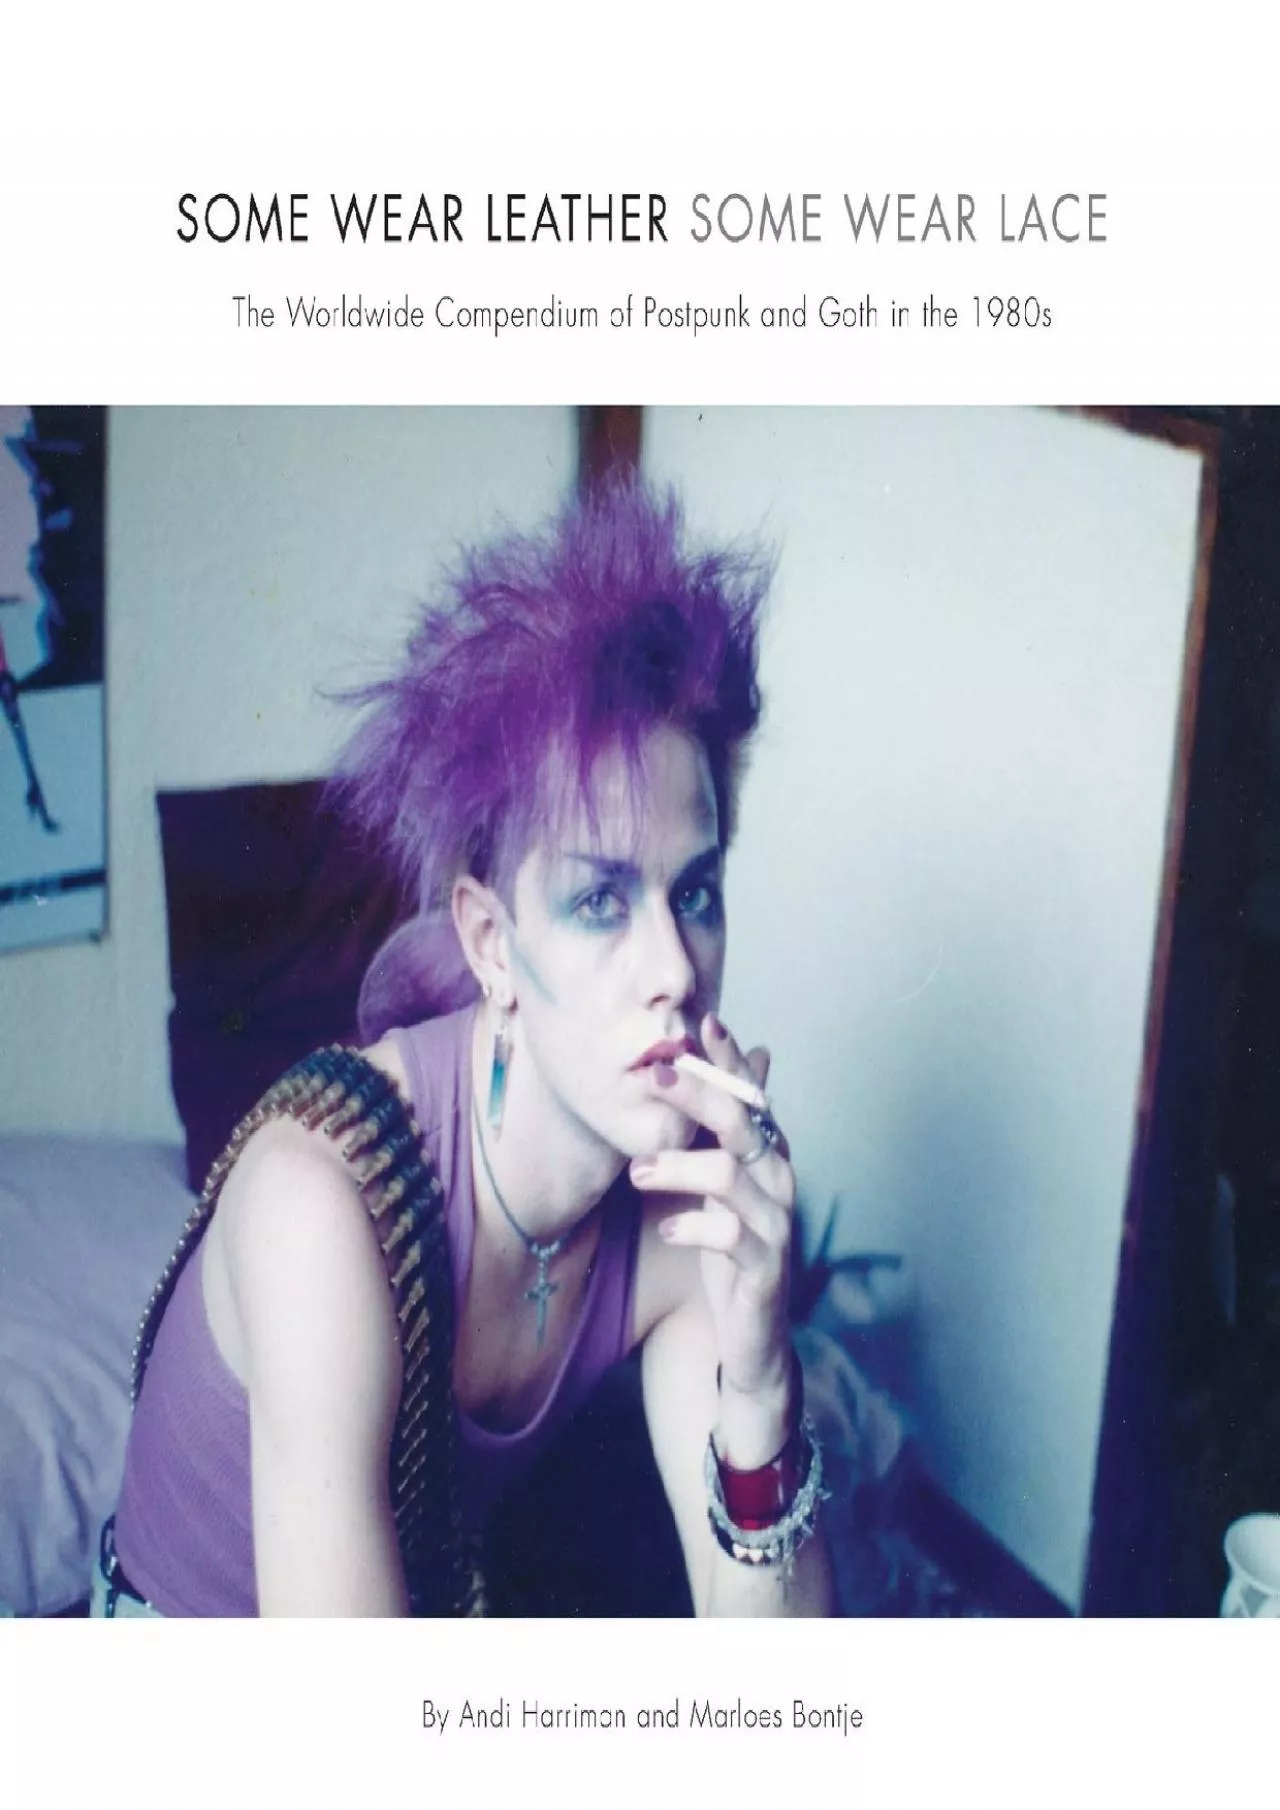 (BOOK)-Some Wear Leather, Some Wear Lace: The Worldwide Compendium of Postpunk and Goth